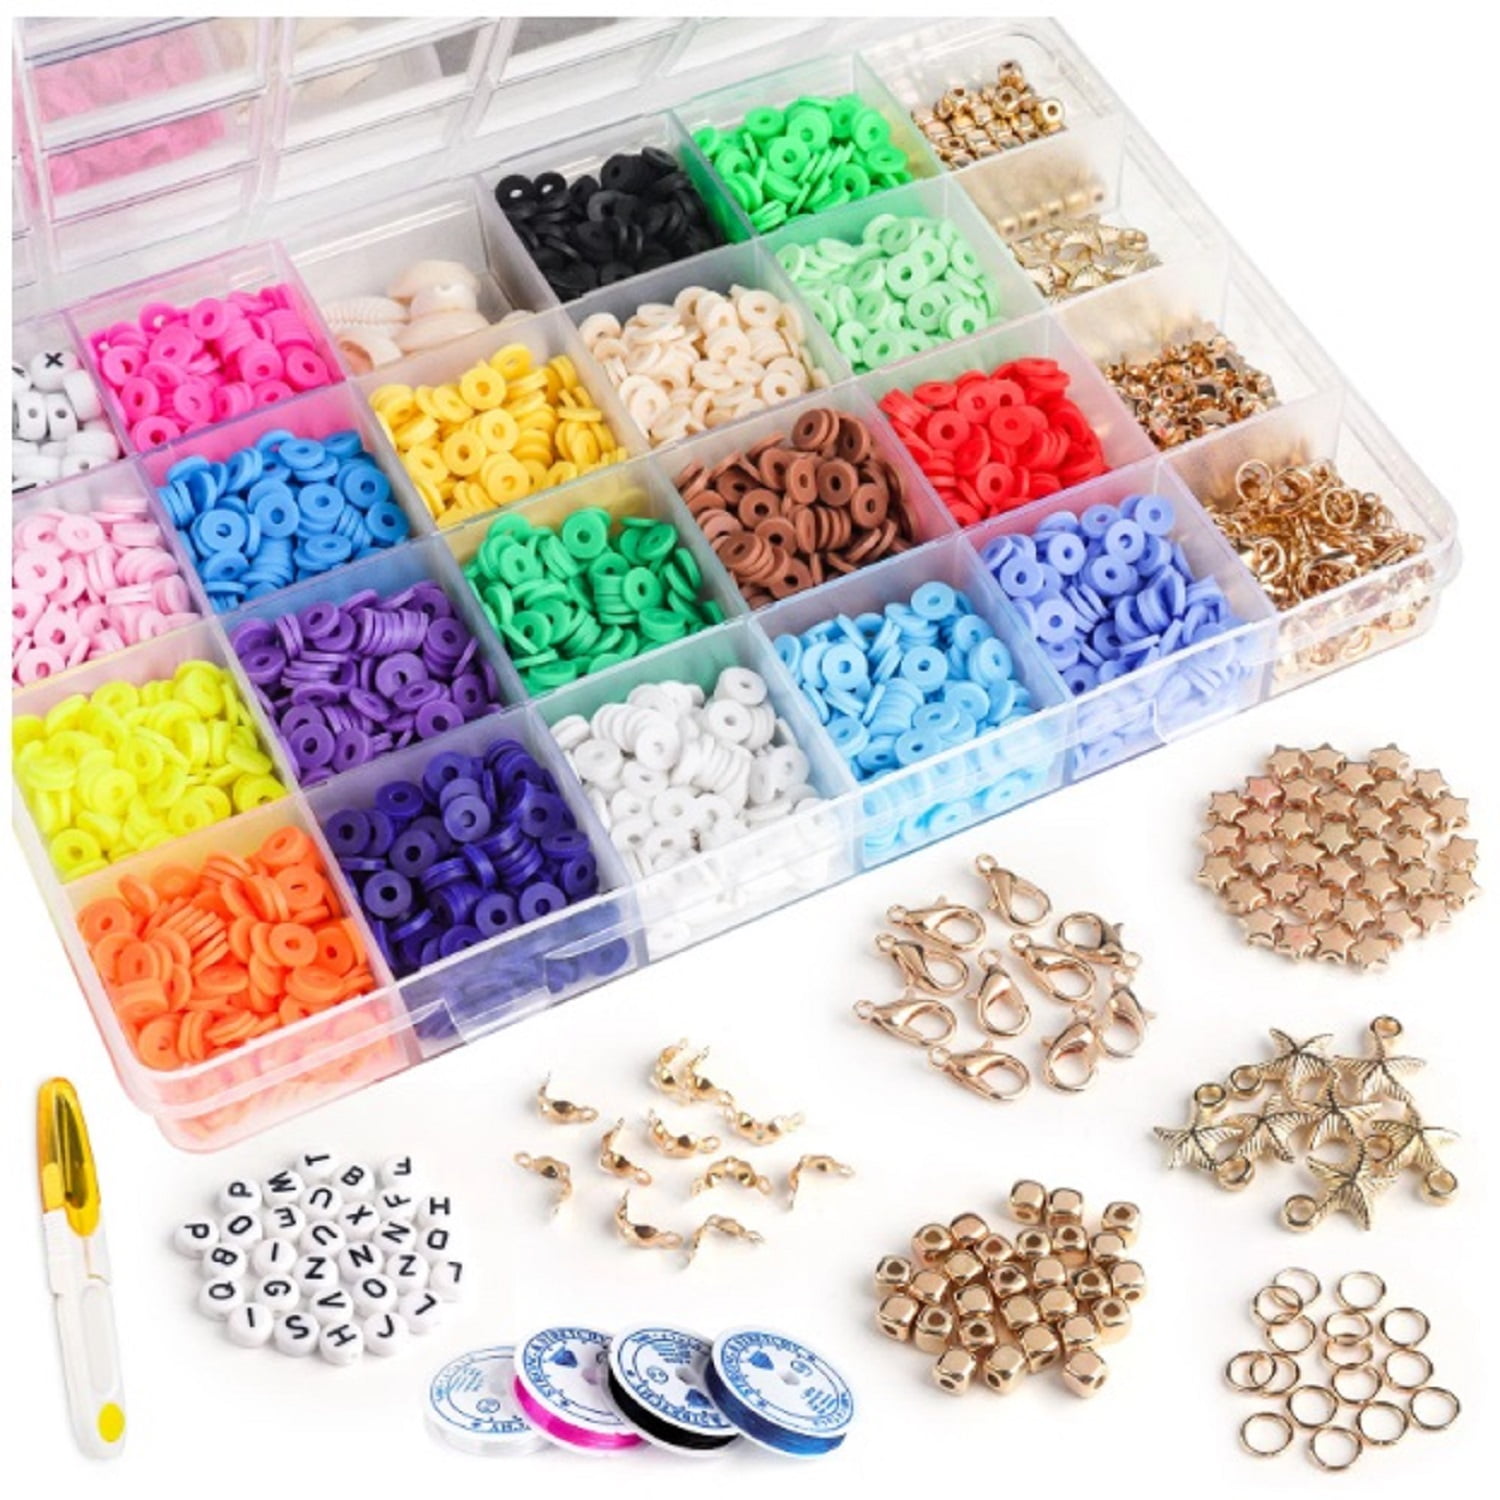 MODDA Charm Bracelet Making Kit with Cute Shoulder Bag, Assorted Beads and Charms, Jewelry Making Kit for Girls, Crafts for Kids, Toys for Girls, Gift